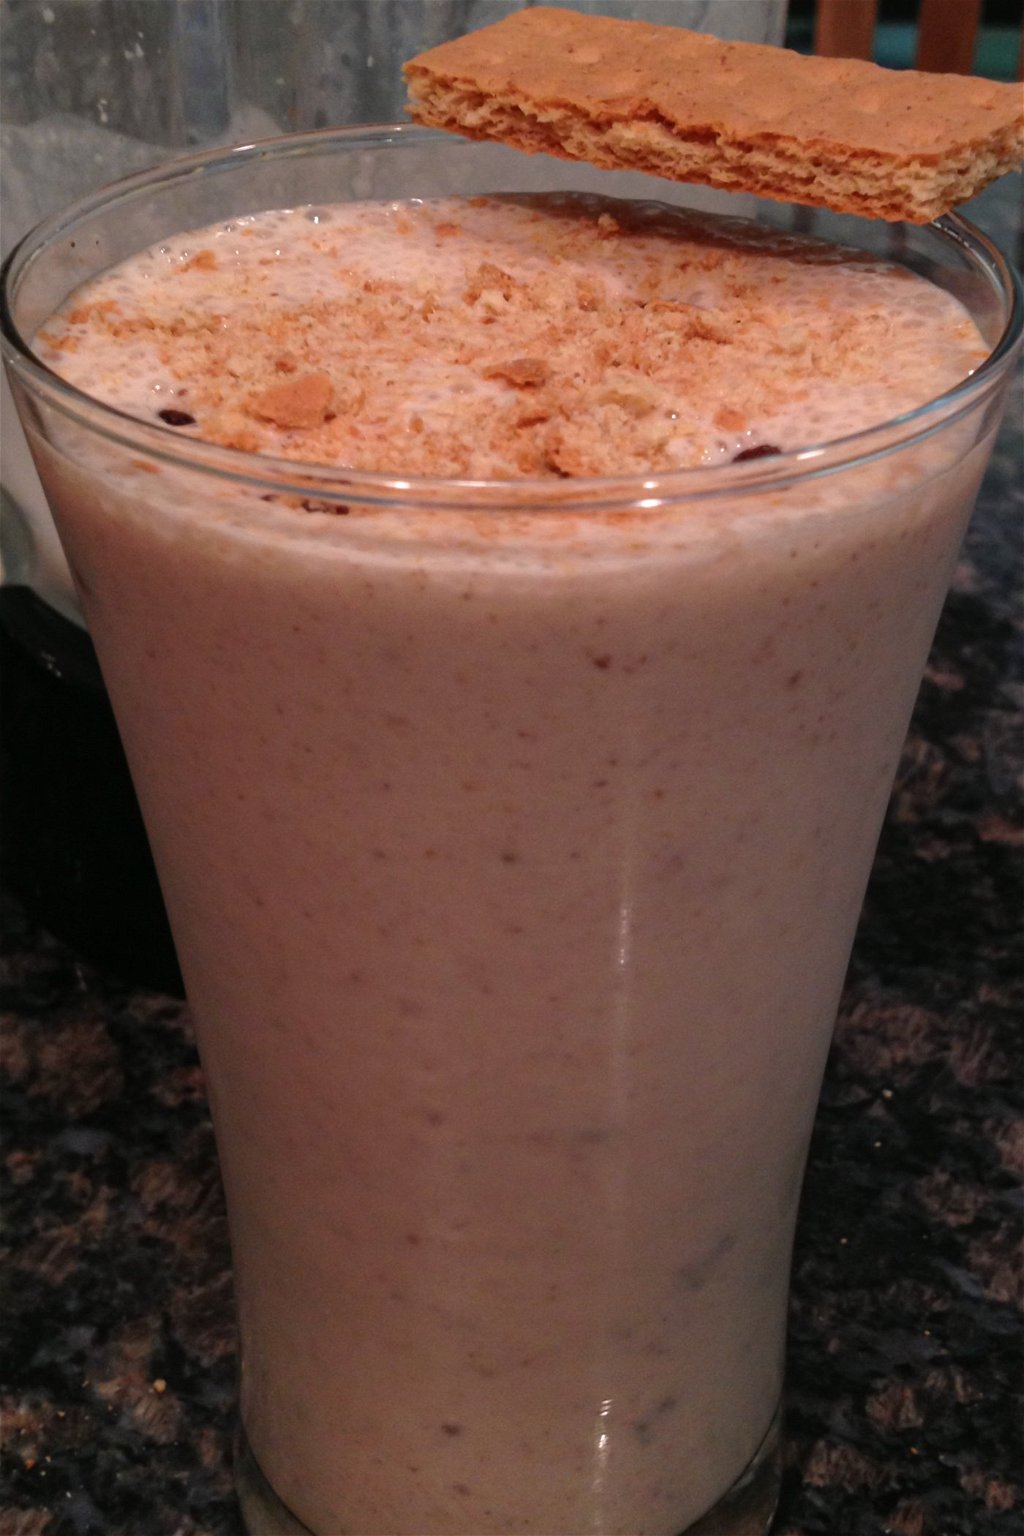 https://media.theproteinchef.co/wp-content/uploads/2020/03/Oatmeal-Cookie-Protein-Shake-Recipe.jpg